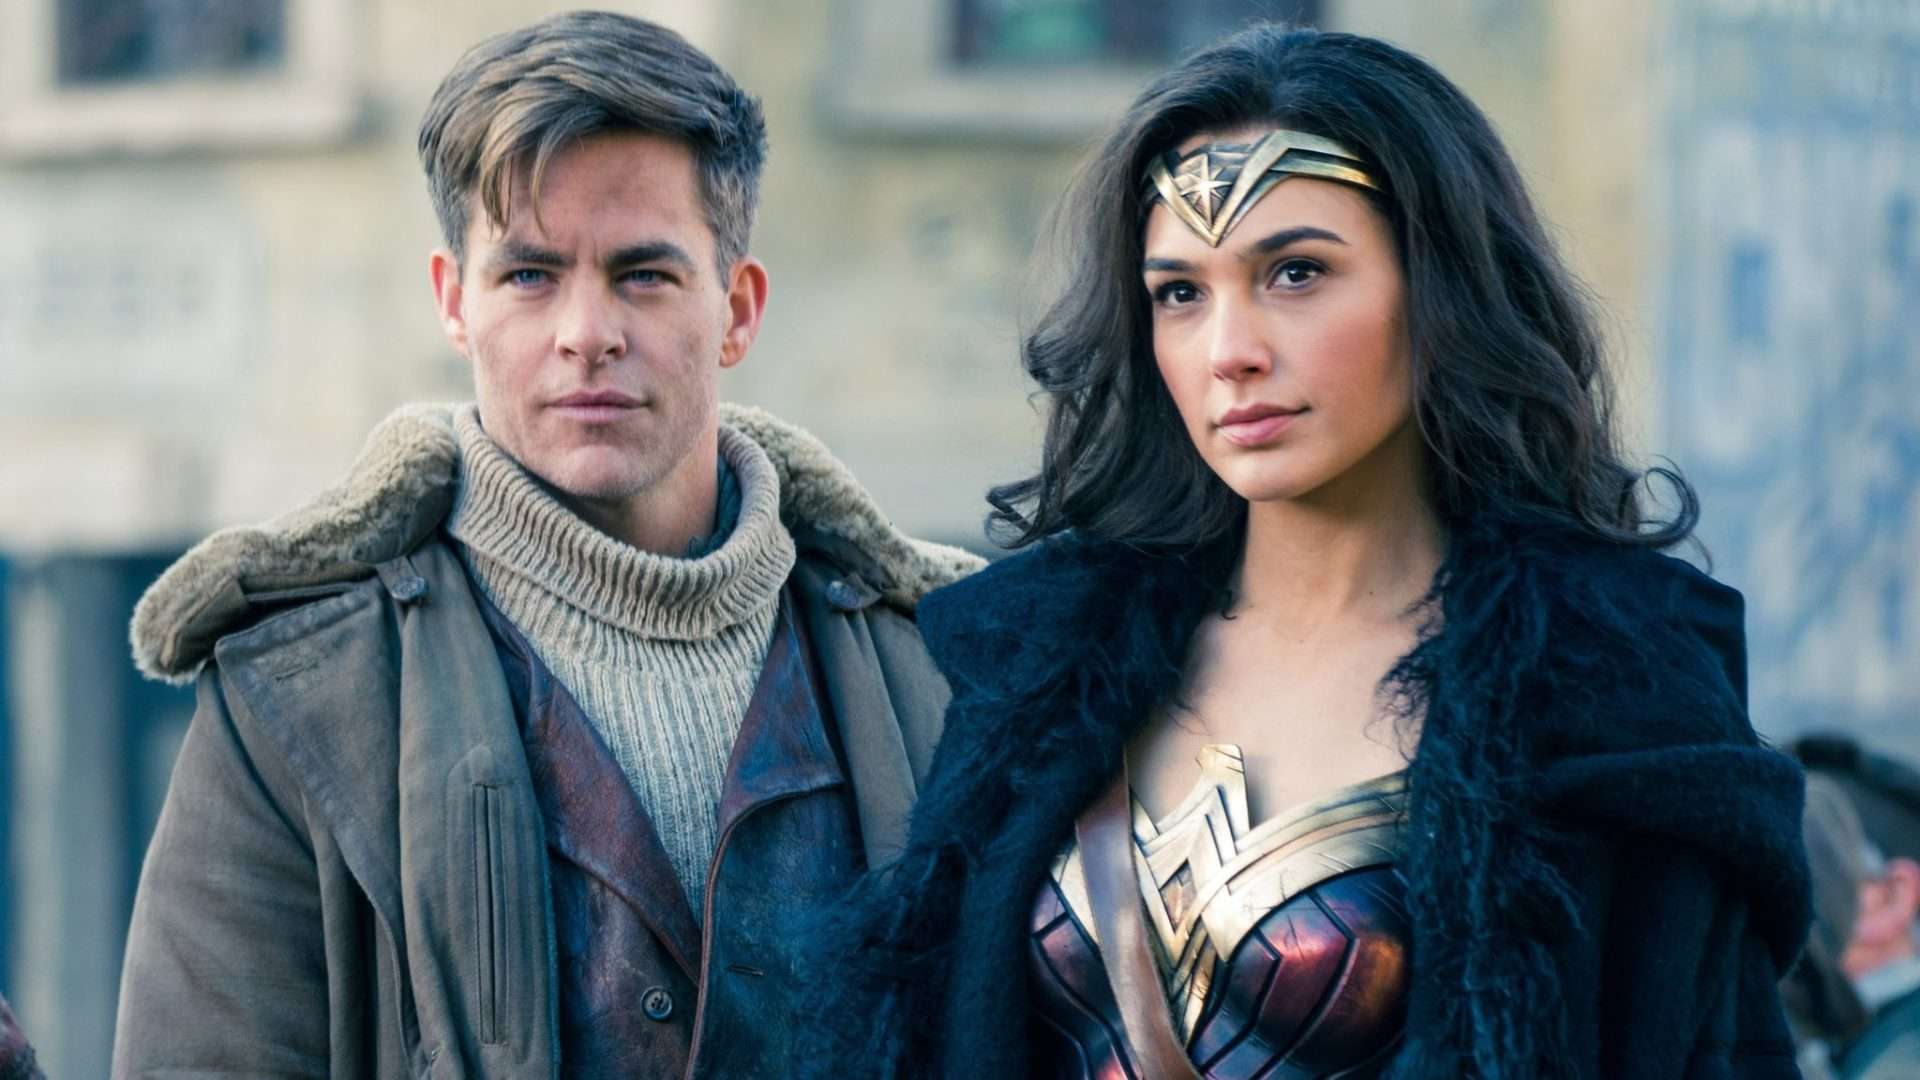 Top 10 Highest-Grossing Films Directed by Women (Other Than Barbie) Wonder Woman (2017)